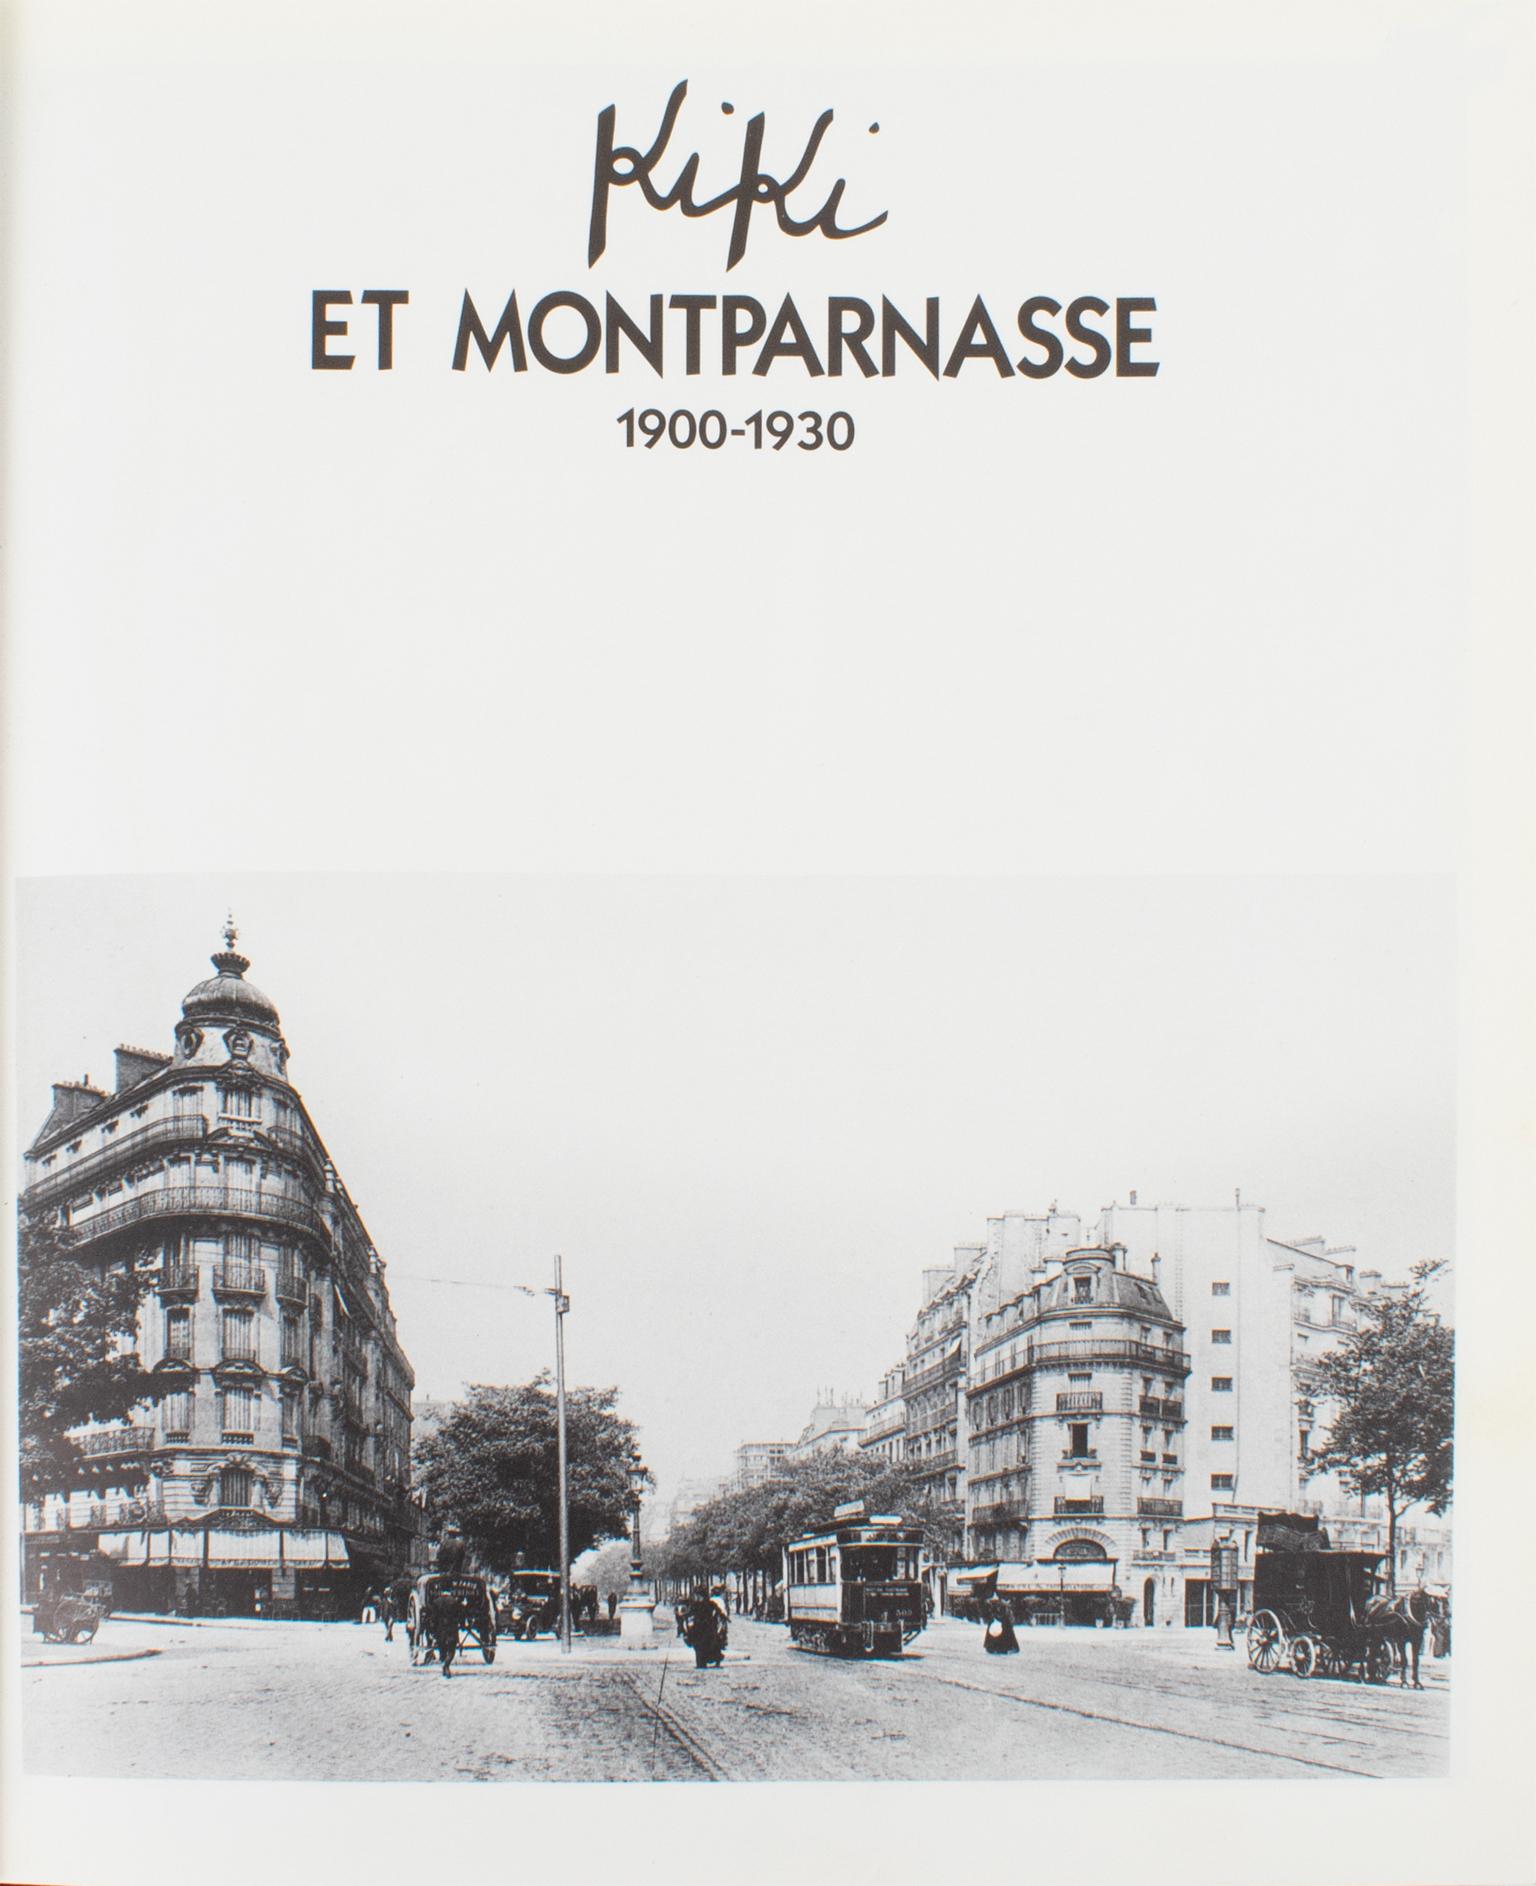 Kiki and Montparnasse 1900-1930, French Book by Billy Kluver, 1989